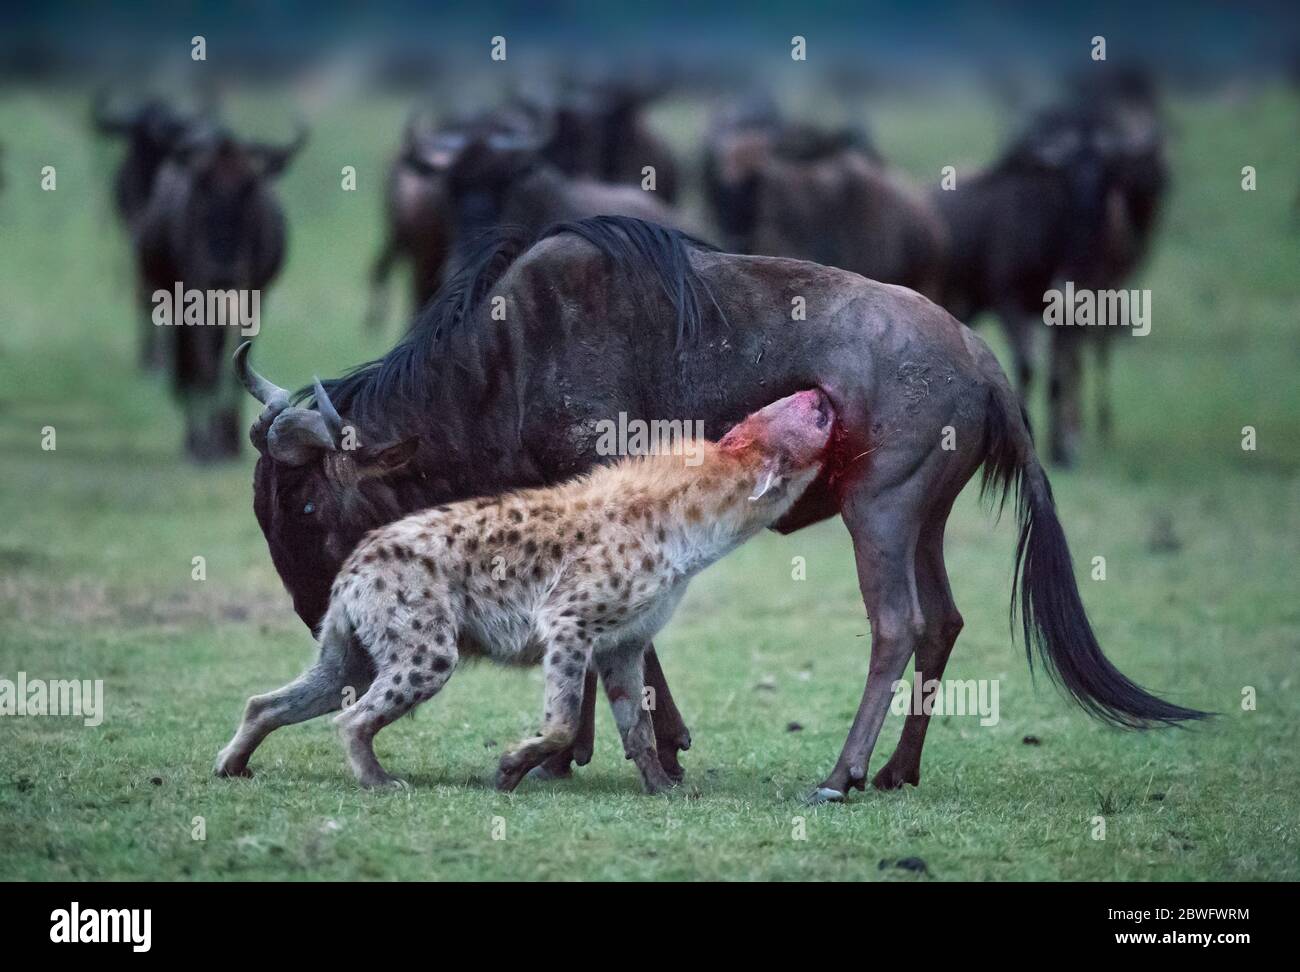 After tackling the wildebeest to the ground, the hyena managed to chew its way inside the wildebeest's soft flank, before the struggling animal got ba Stock Photo